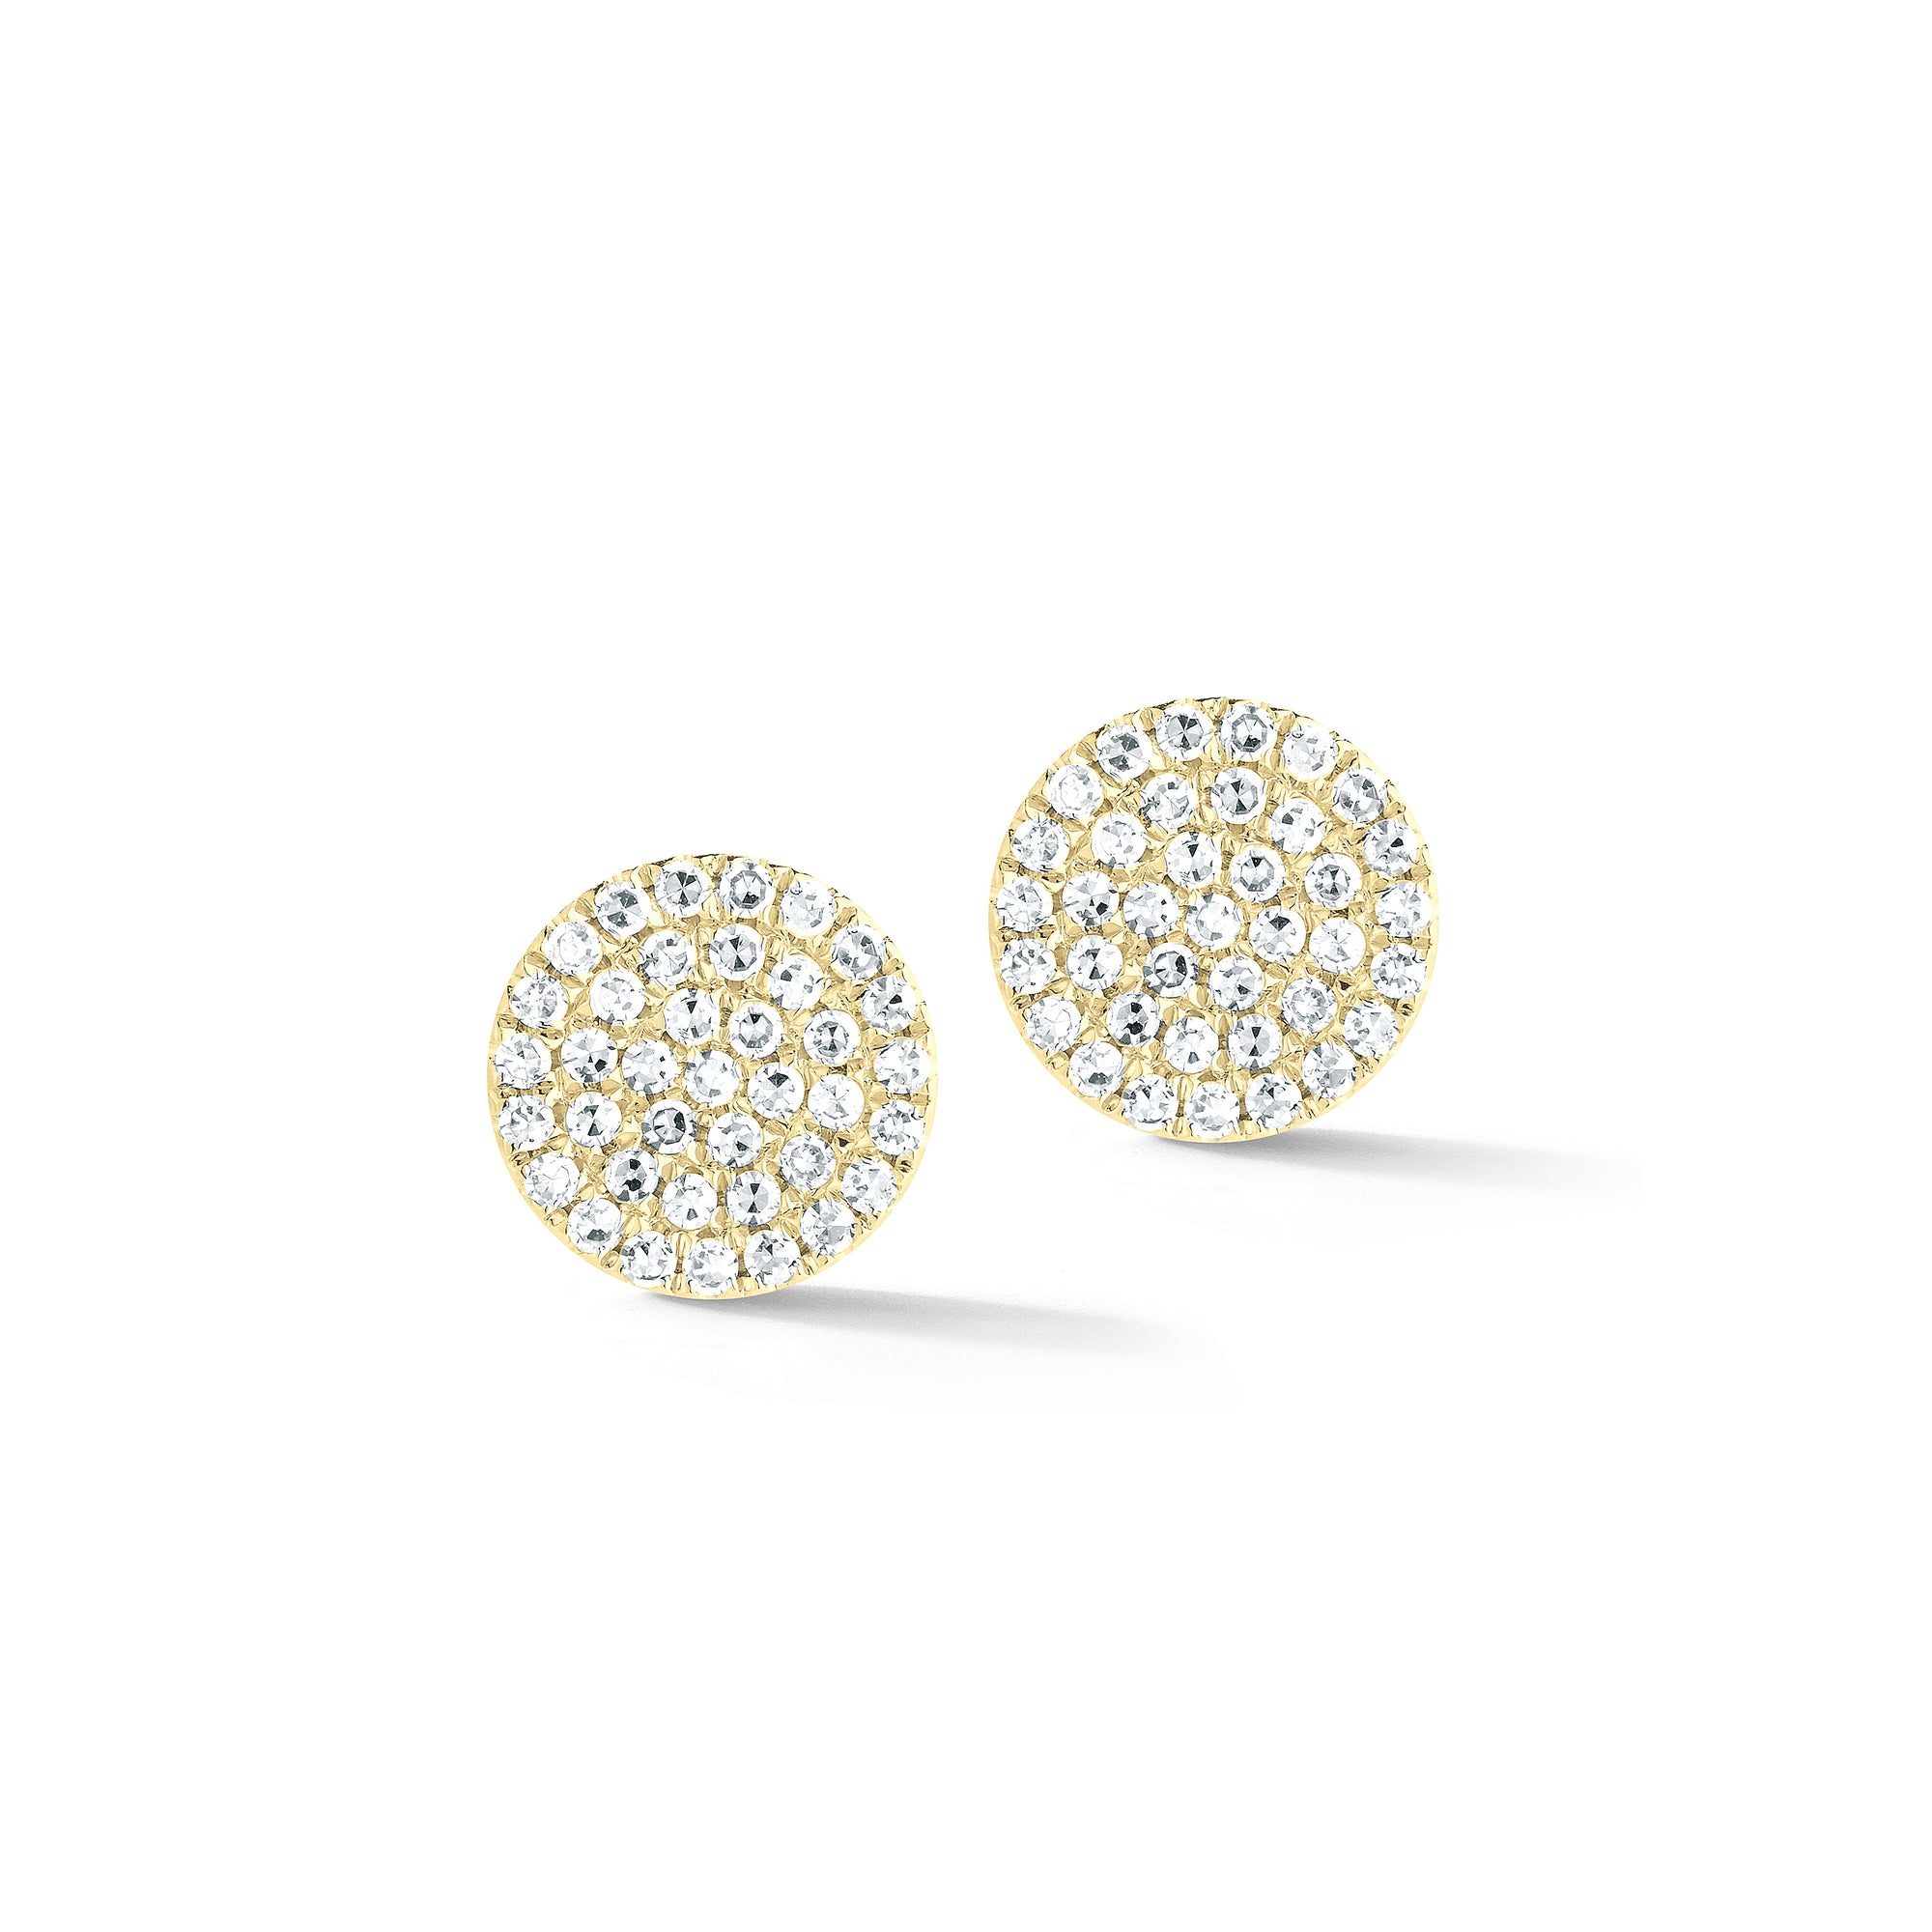 Diamond Disc Stud Earrings -14k yellow gold weighing 1.38 grams -76 round pave-set diamonds totaling 0.22 carats. Approx. diameter is 6.85mm